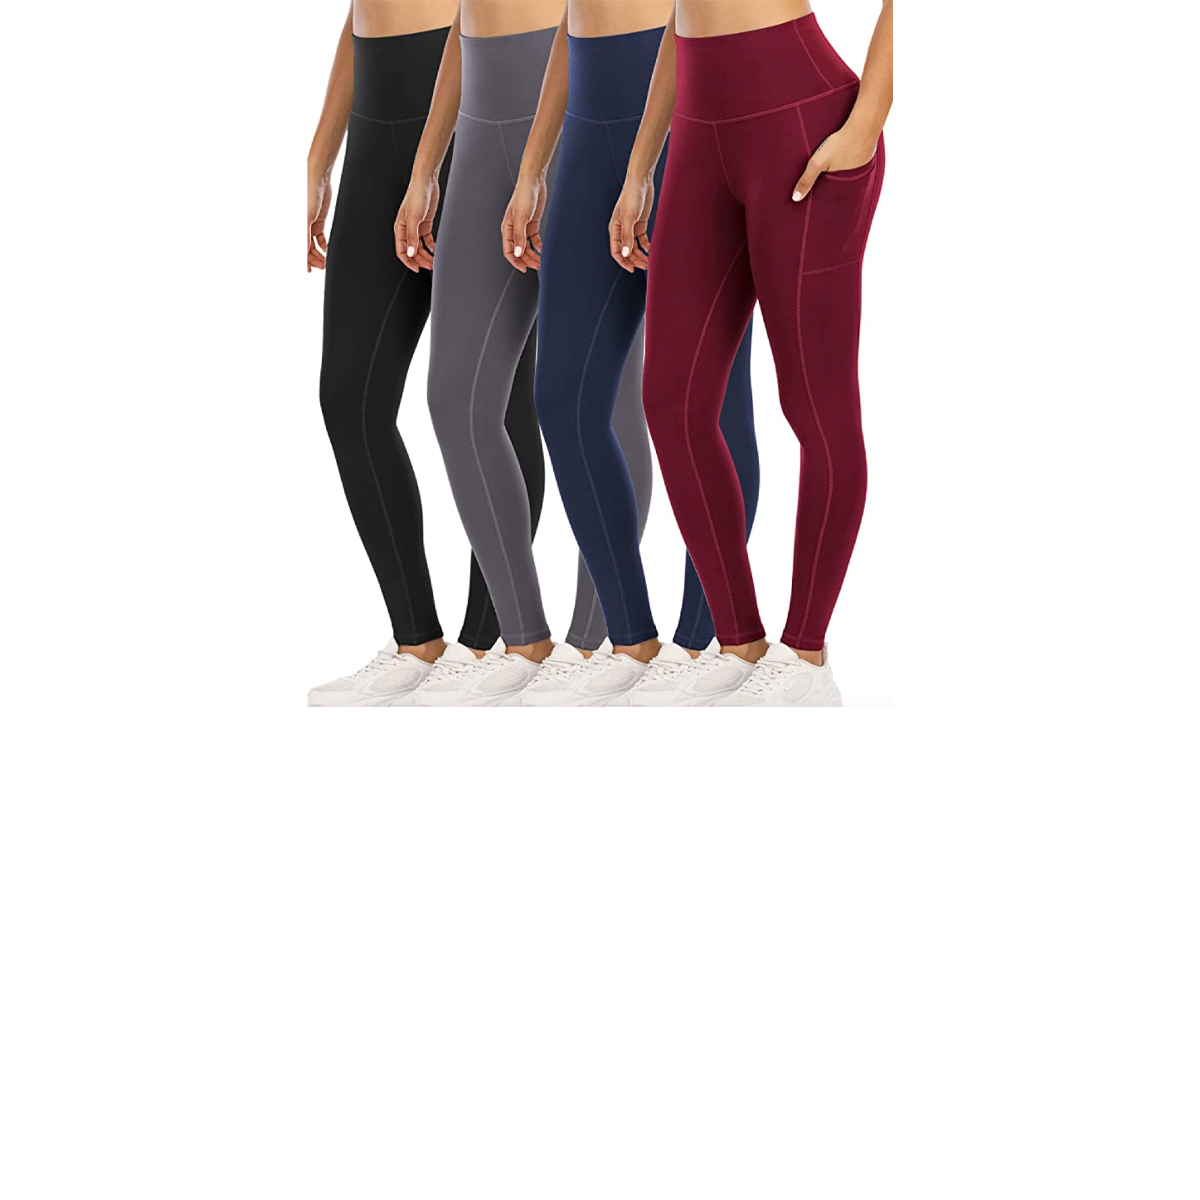 YOUNGCHARM 4 Pack Leggings with Pockets for Women,High